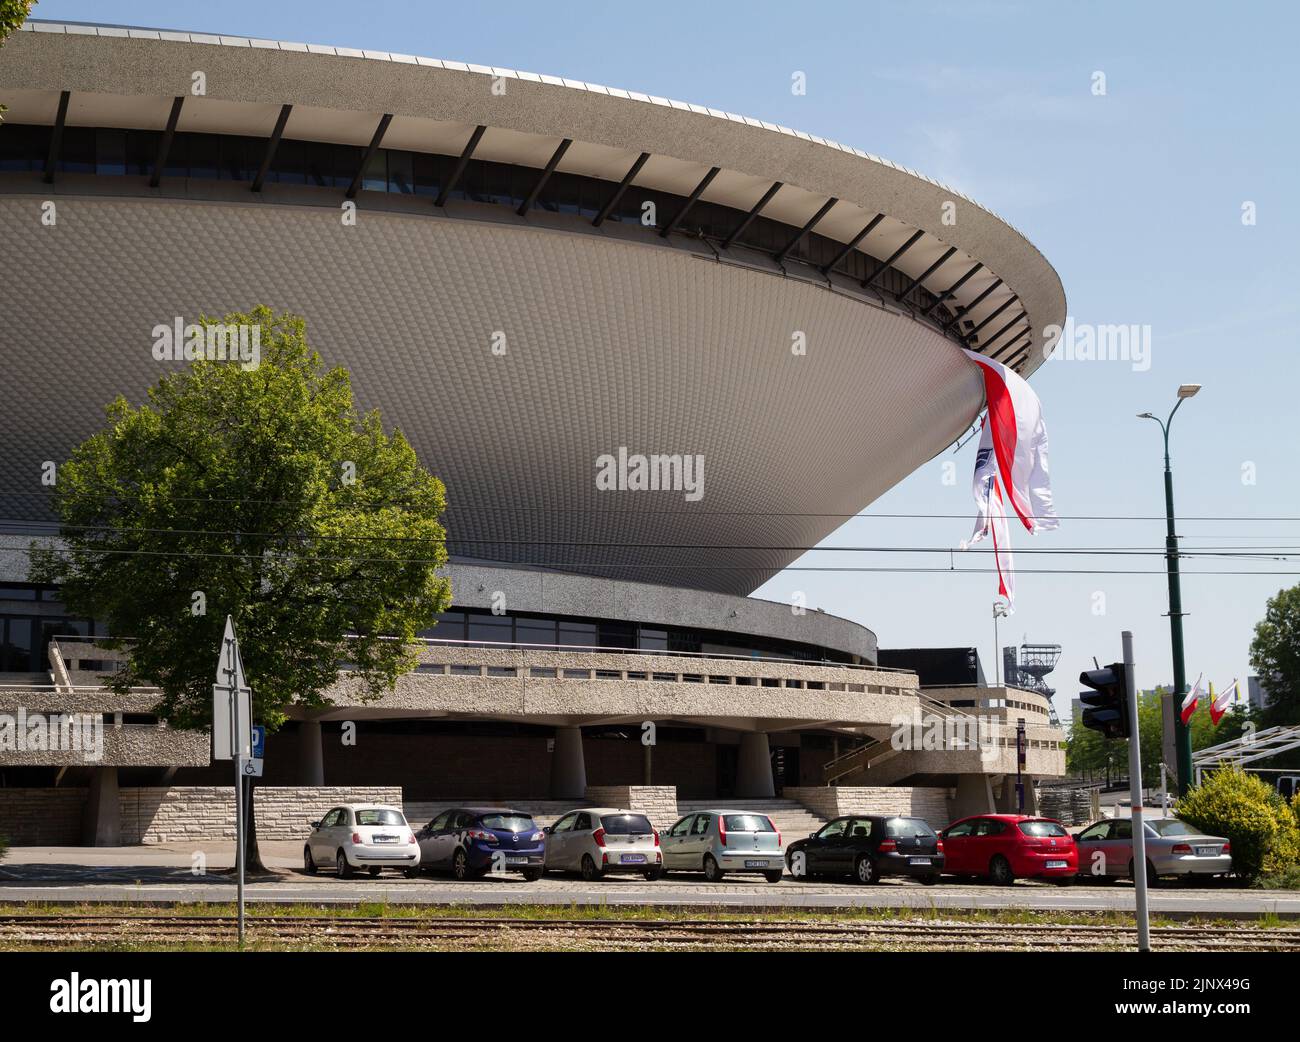 Spodek hall, multipurpose arena complex. Indoor modern sports and  entertainment venue in Katowice, Poland Stock Photo - Alamy